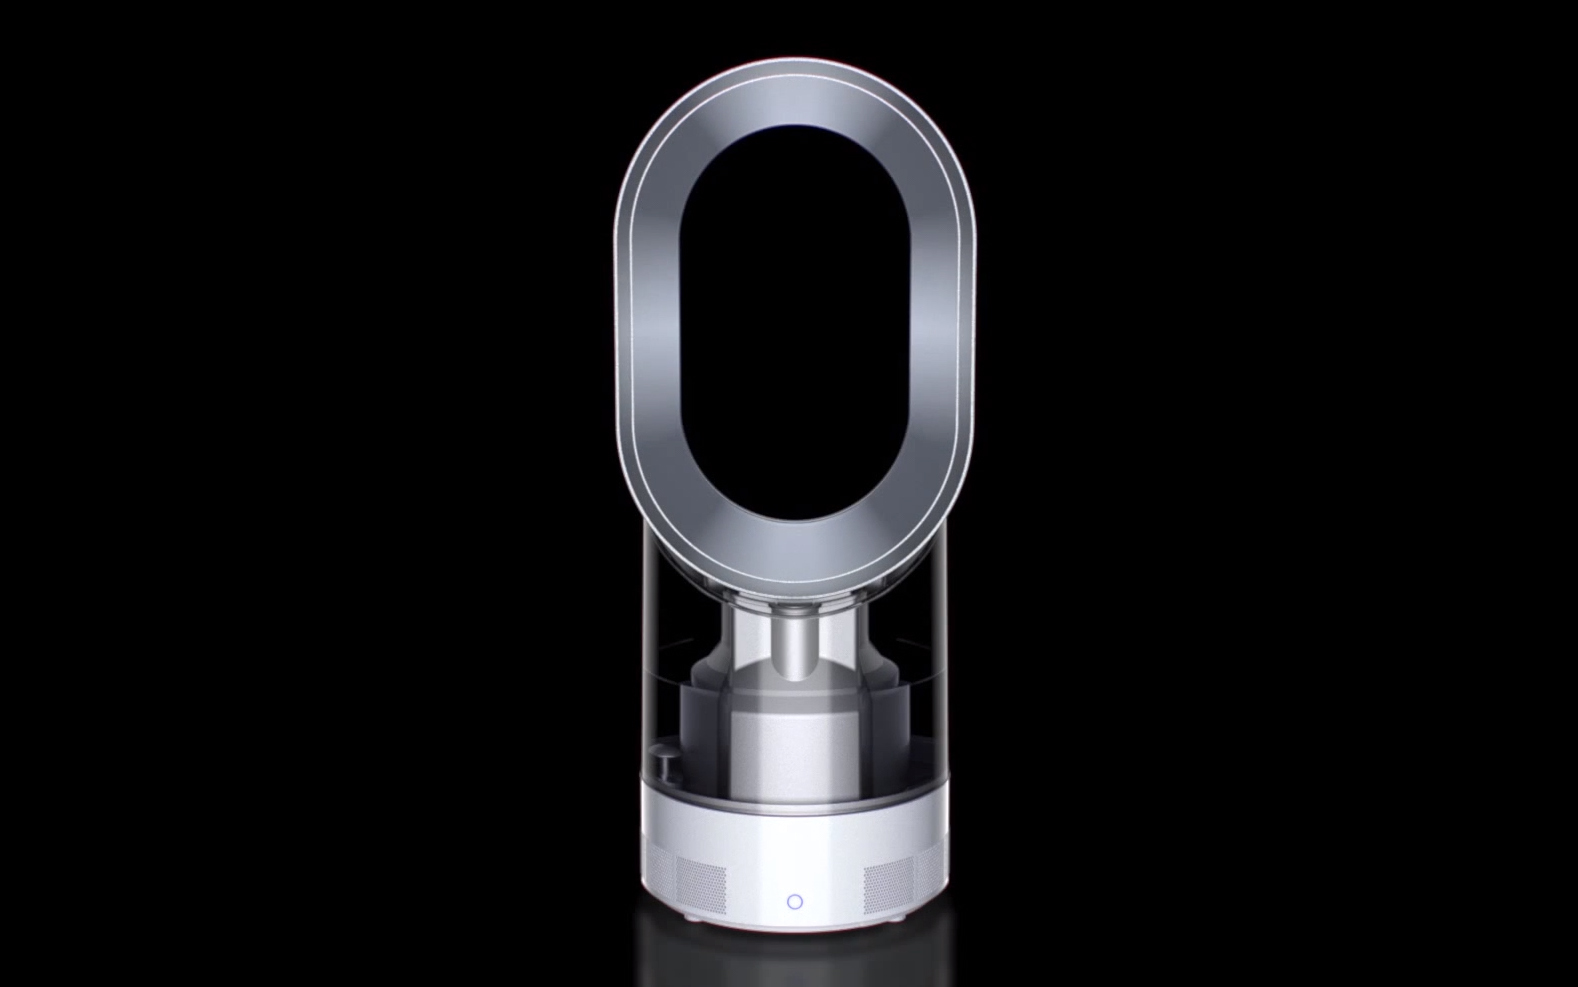 New Dyson Humidifier Kills Germs with Ultraviolet Light for Cleaner Air